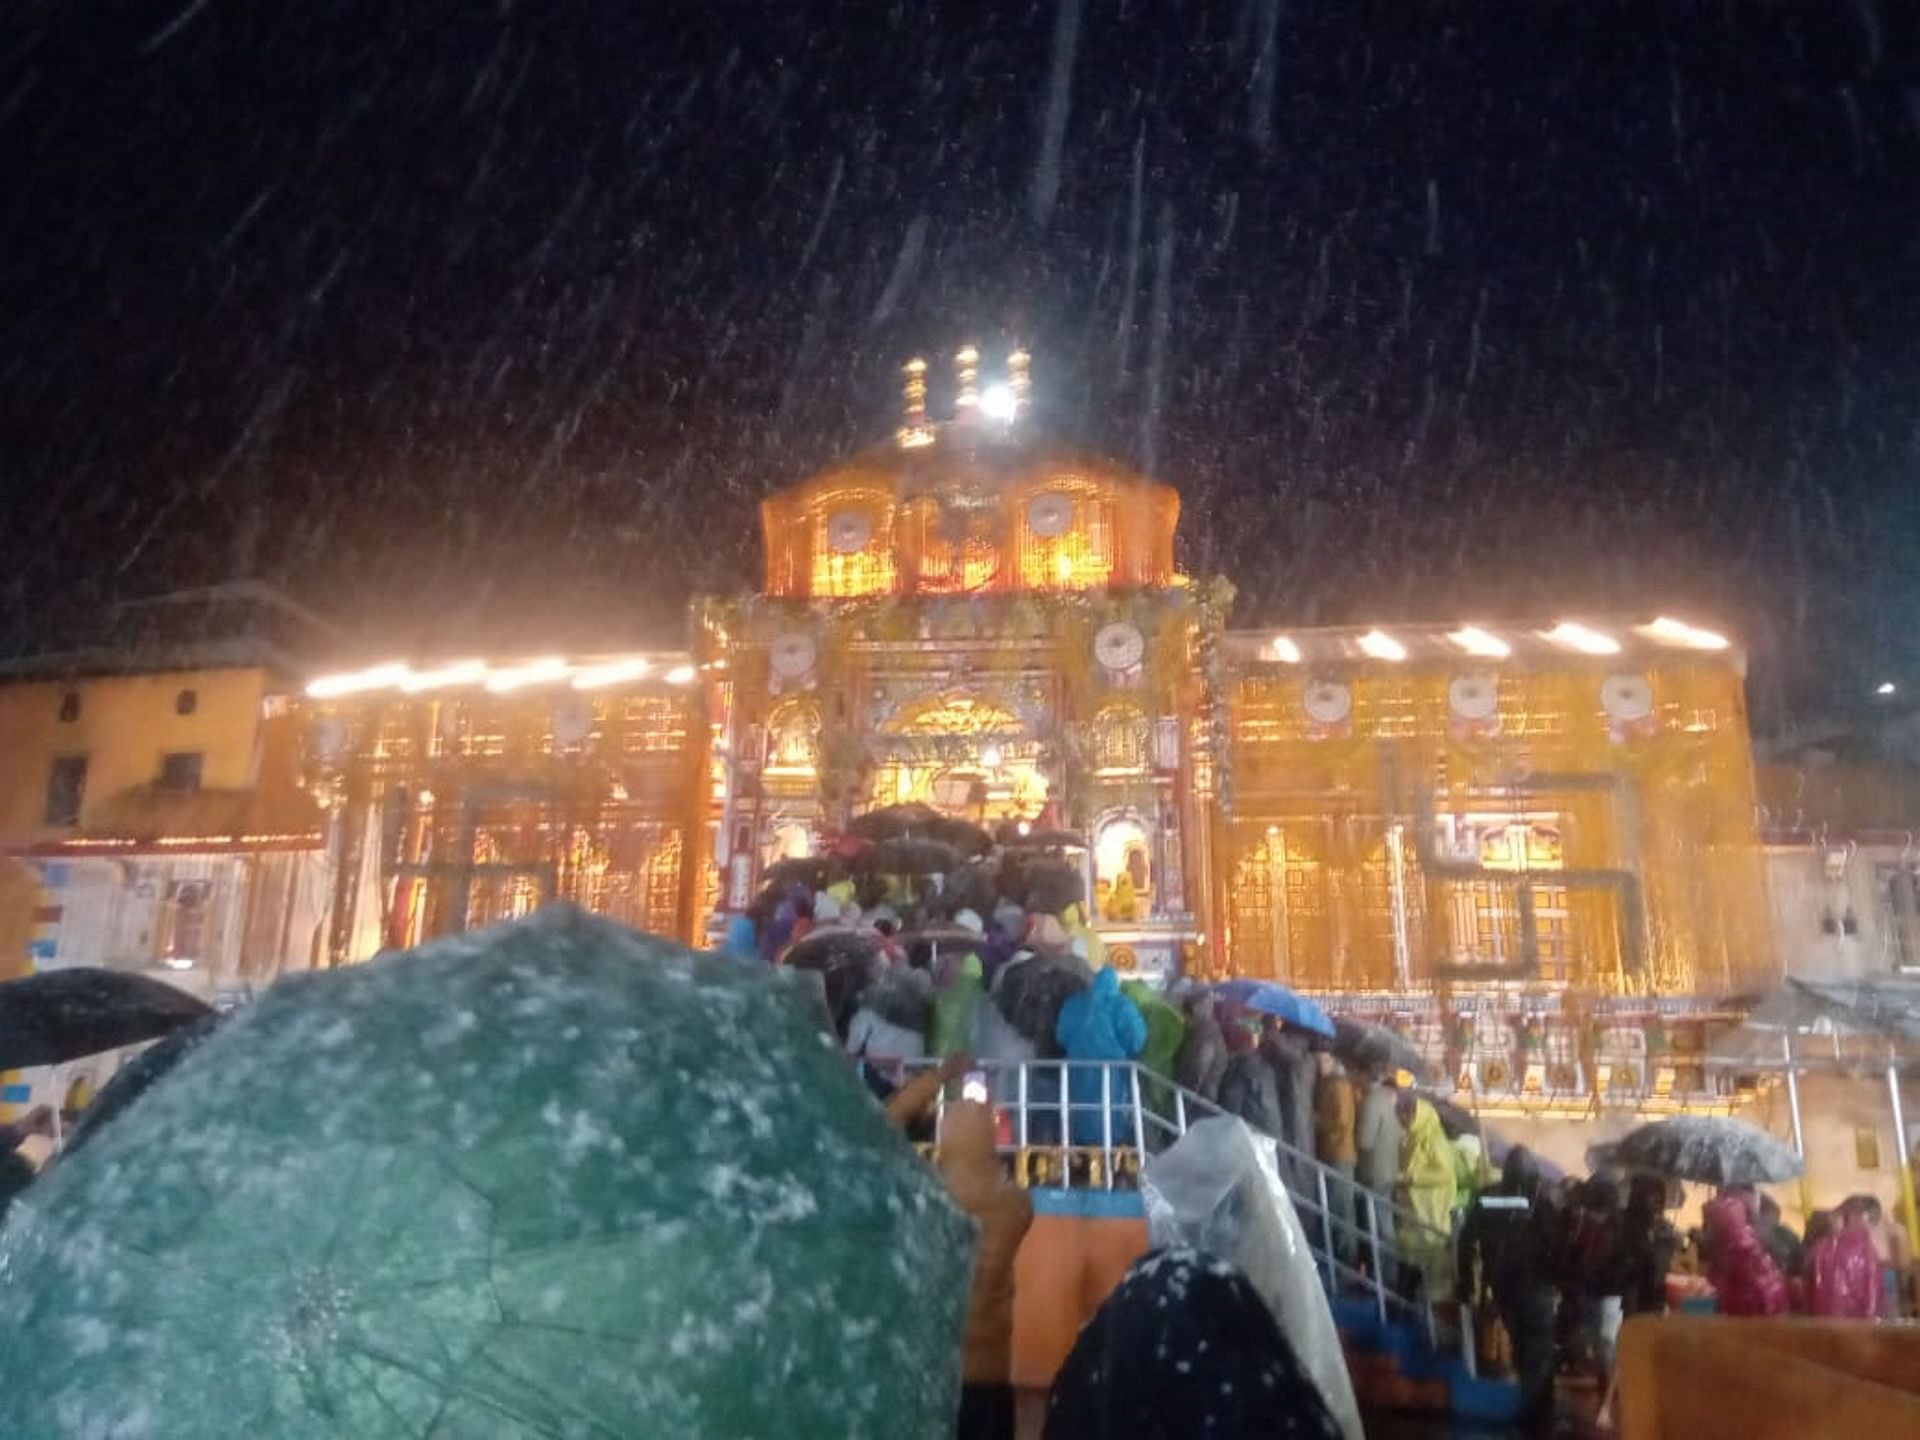 Is the Badrinath Temple originally a Buddhist place of worship? - Quora